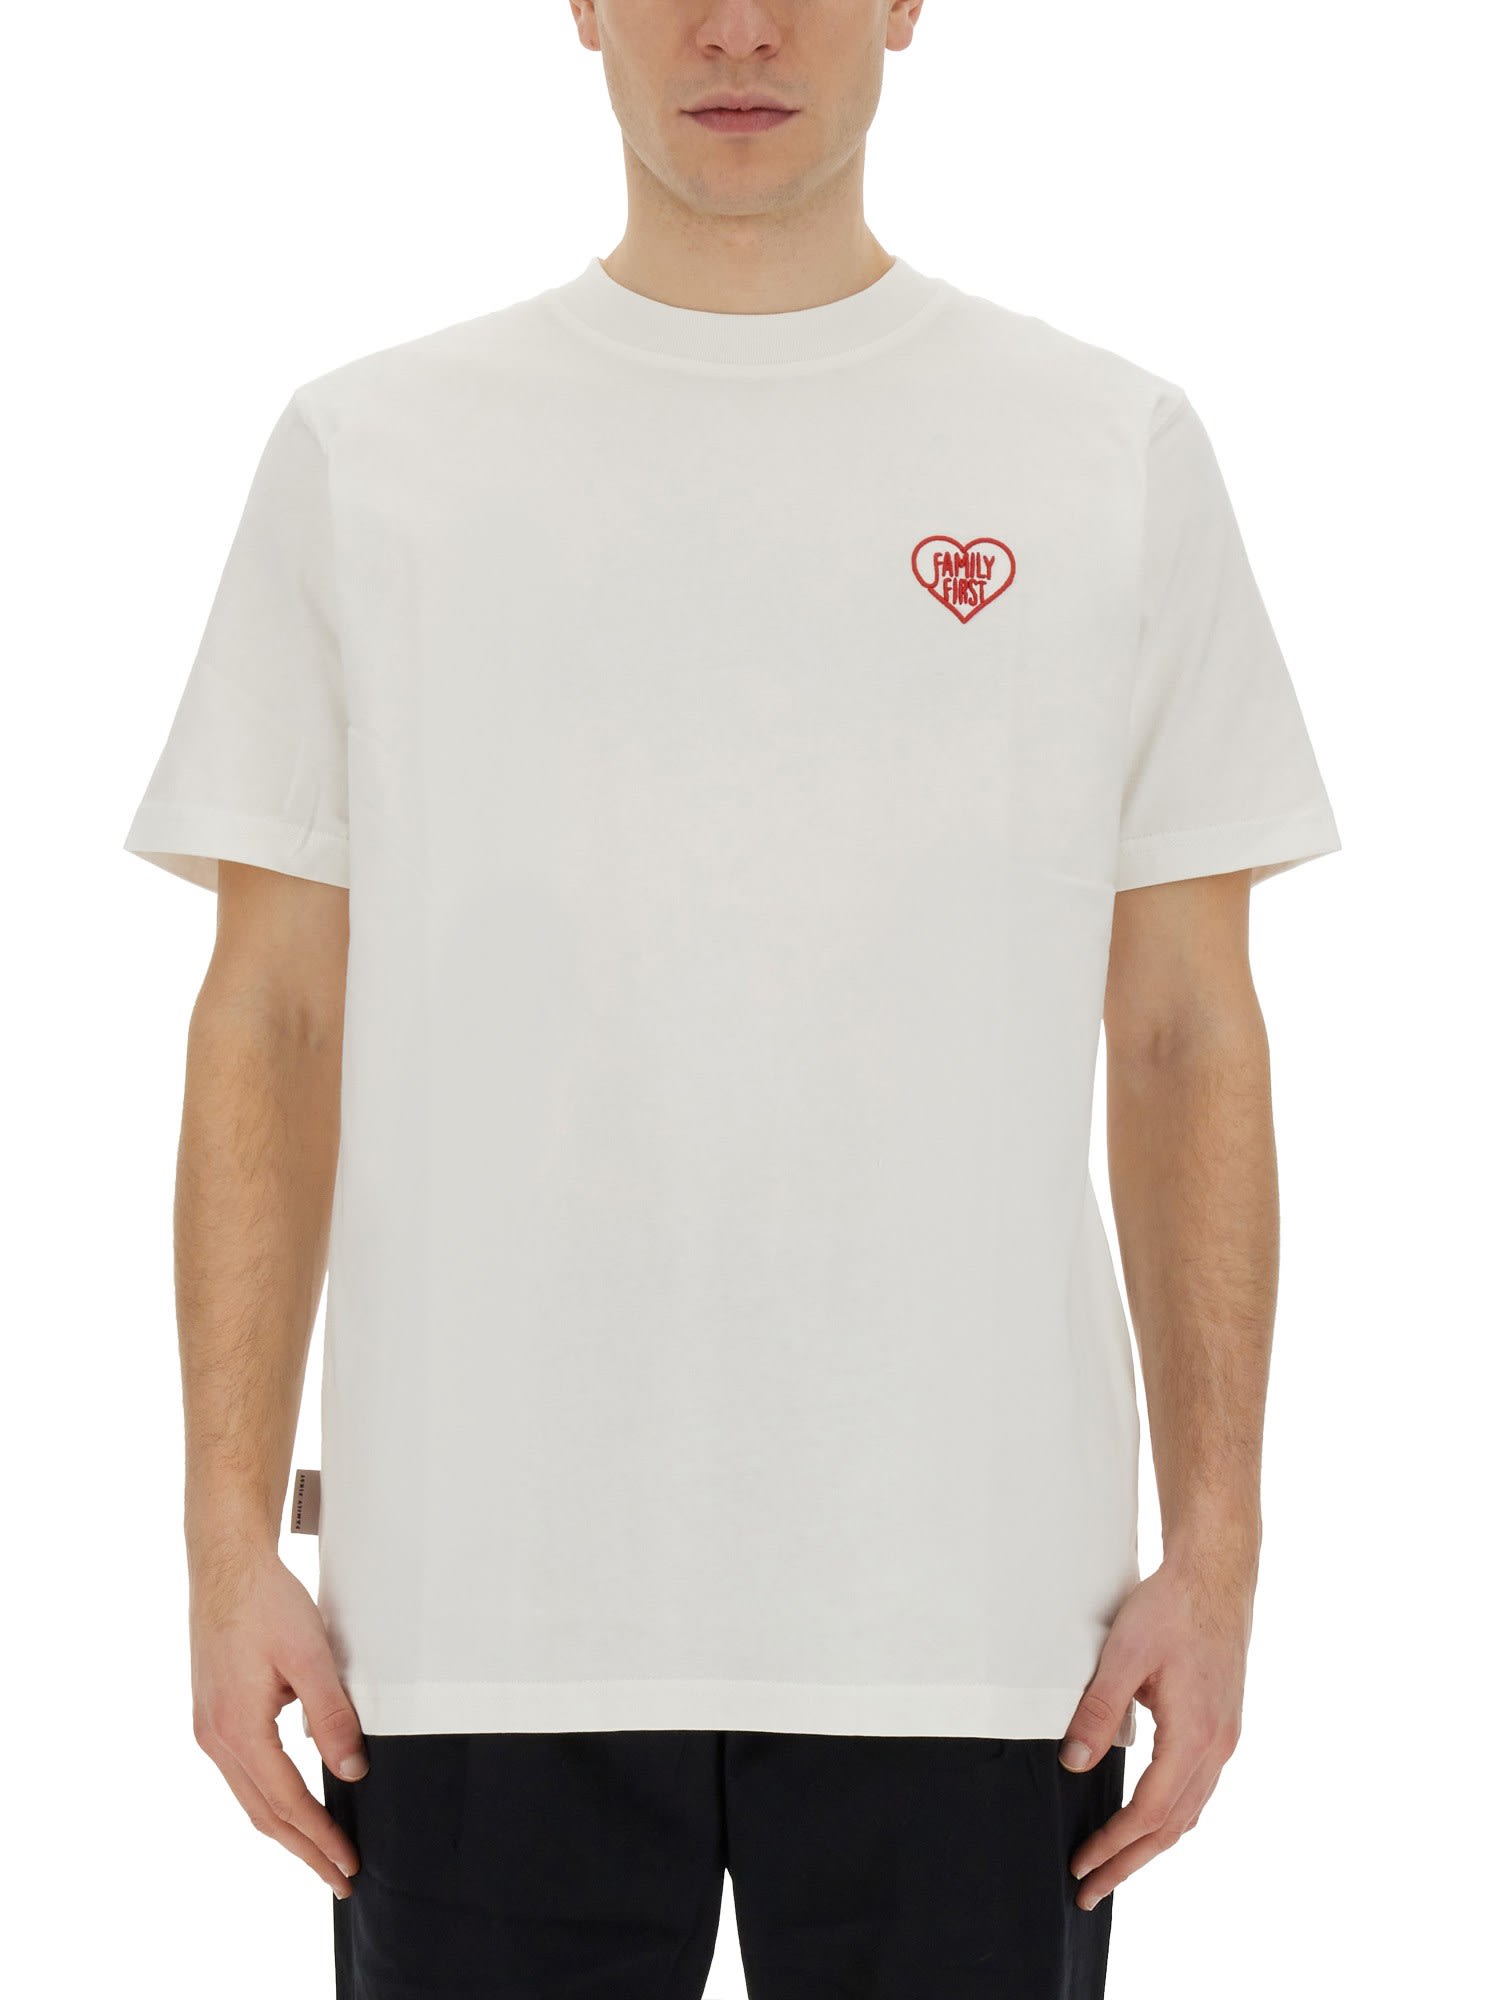 FAMILY FIRST MILANO T-SHIRT WITH HEART EMBROIDERY